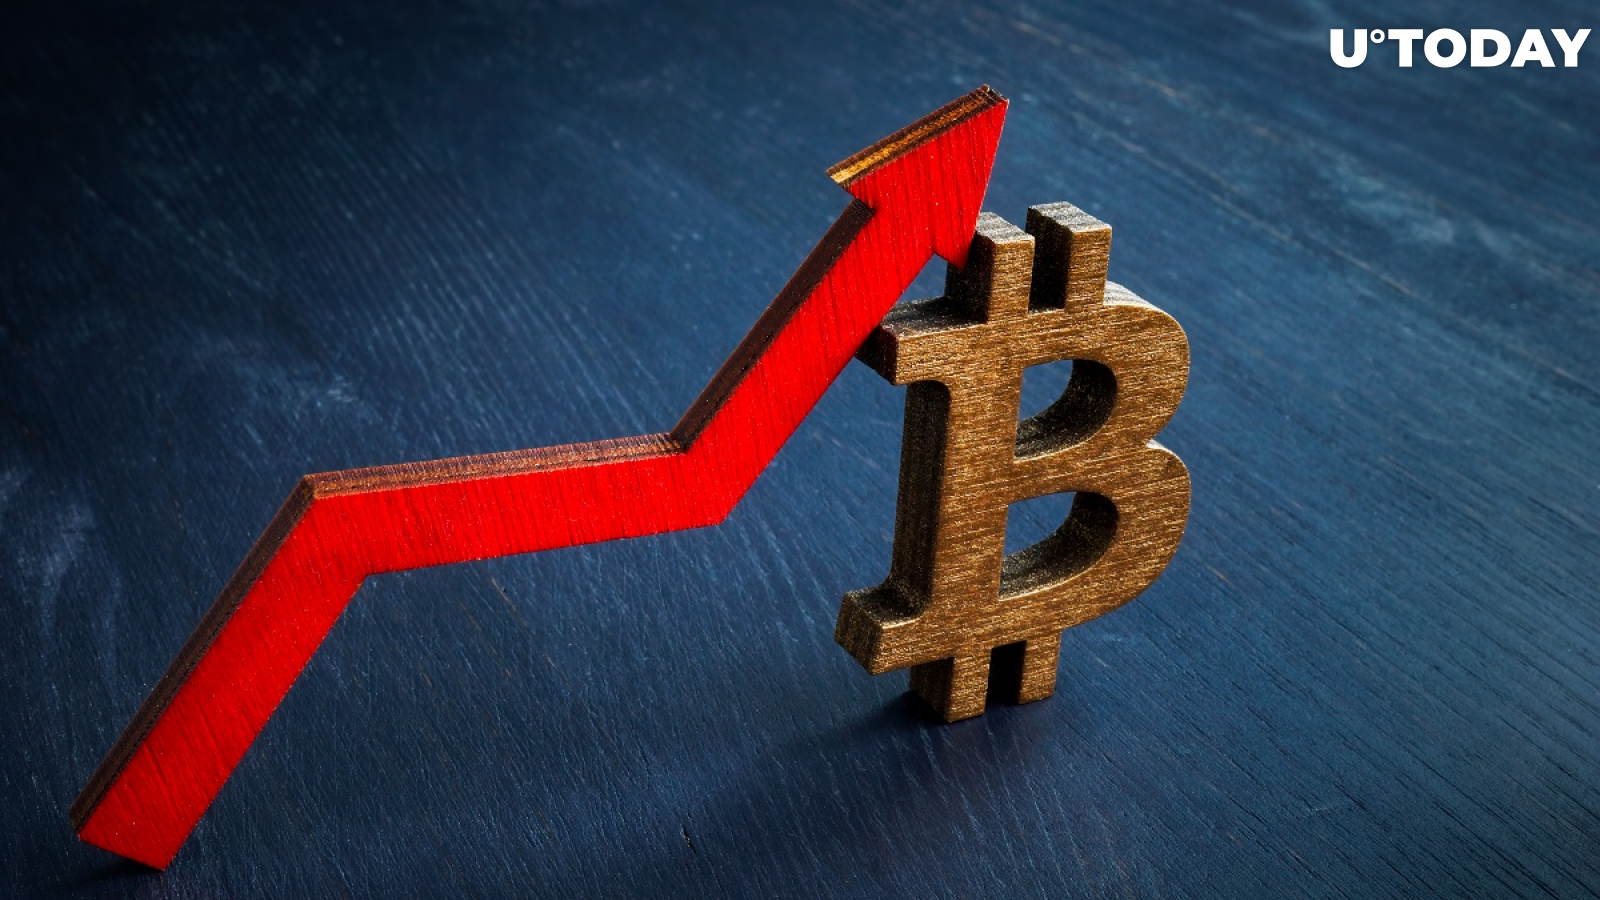 Bitcoin Had Massive Dip on Bitstamp Before Hitting Highest Level Since Early May